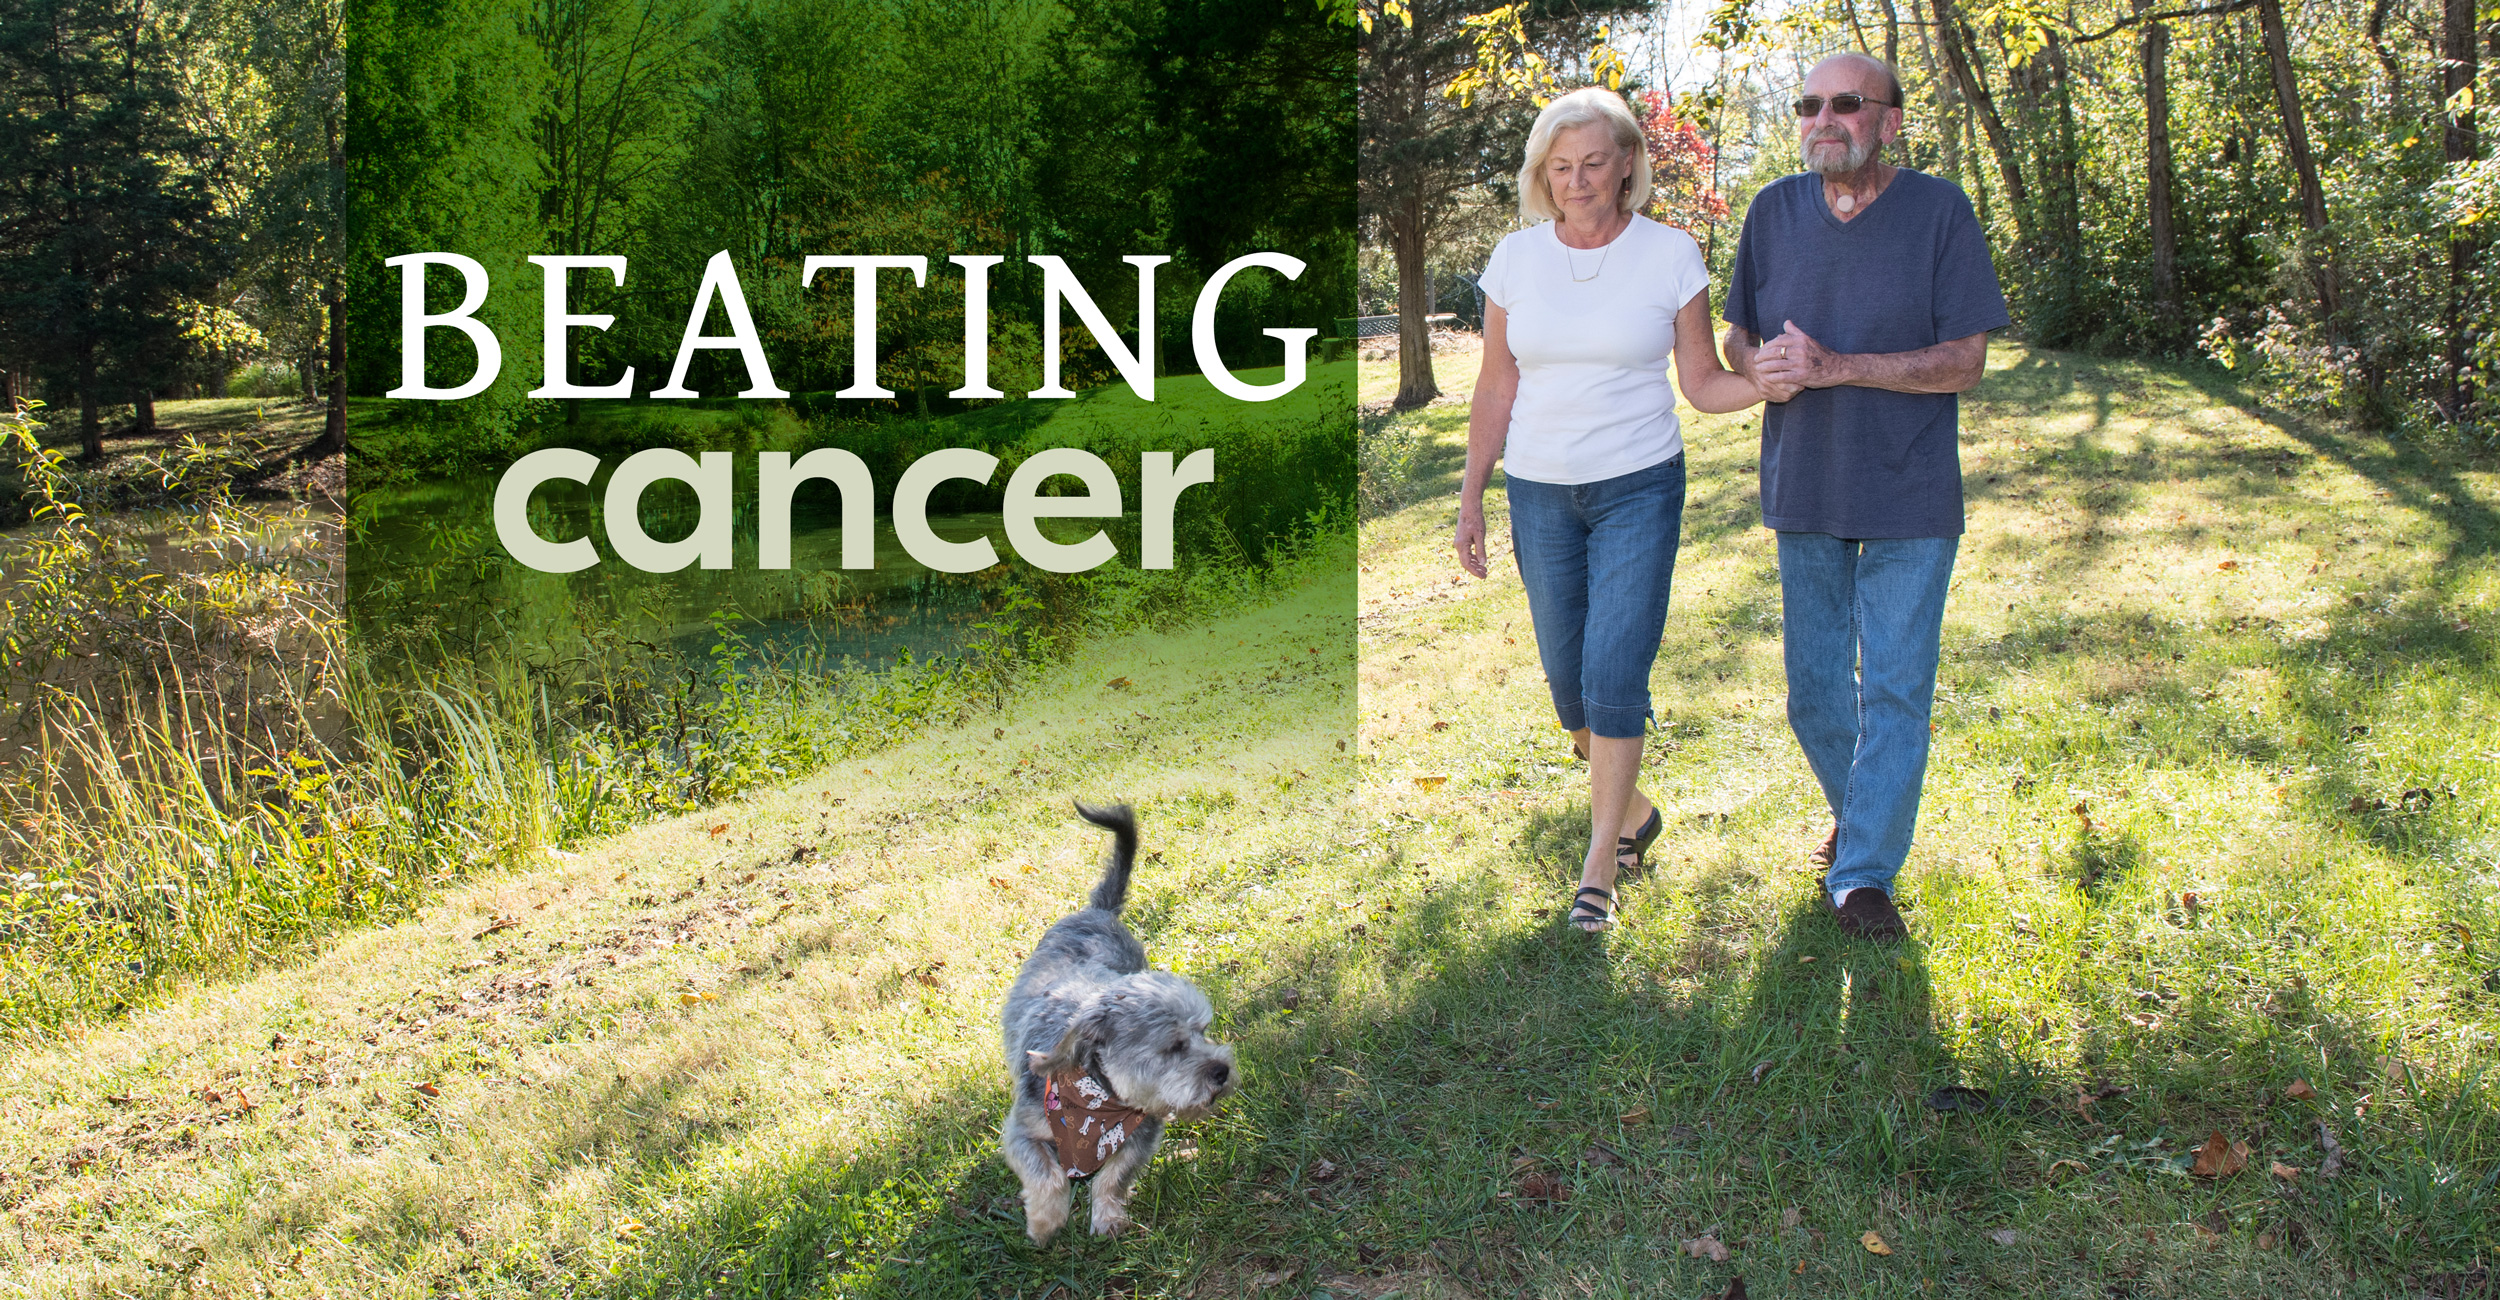 Beating cancer graphic with Poncho Noggler and his wife walking with their dog near a pond